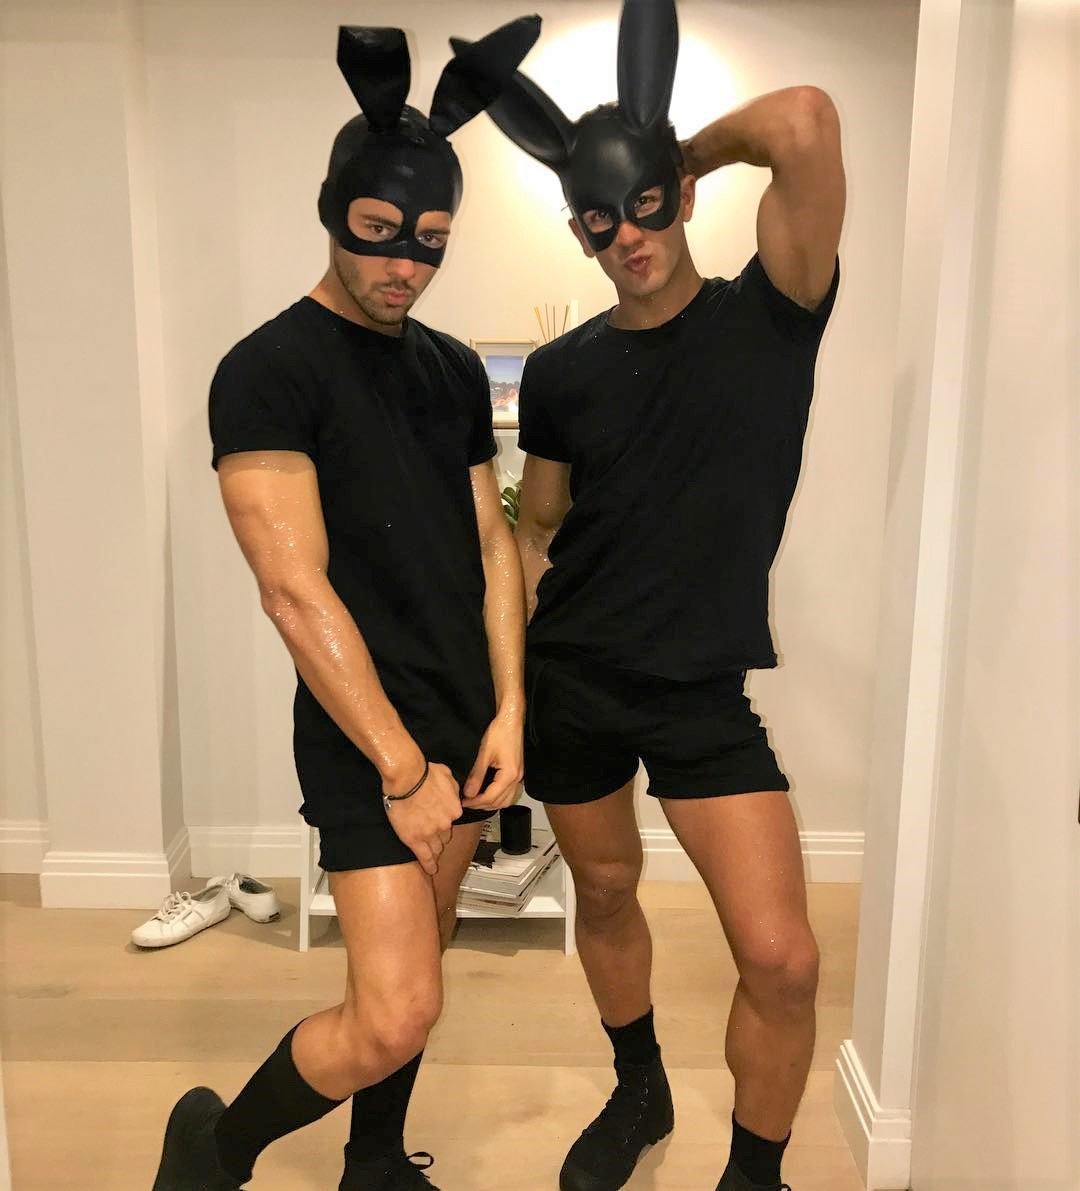 Cute halloween costumes for gay couples